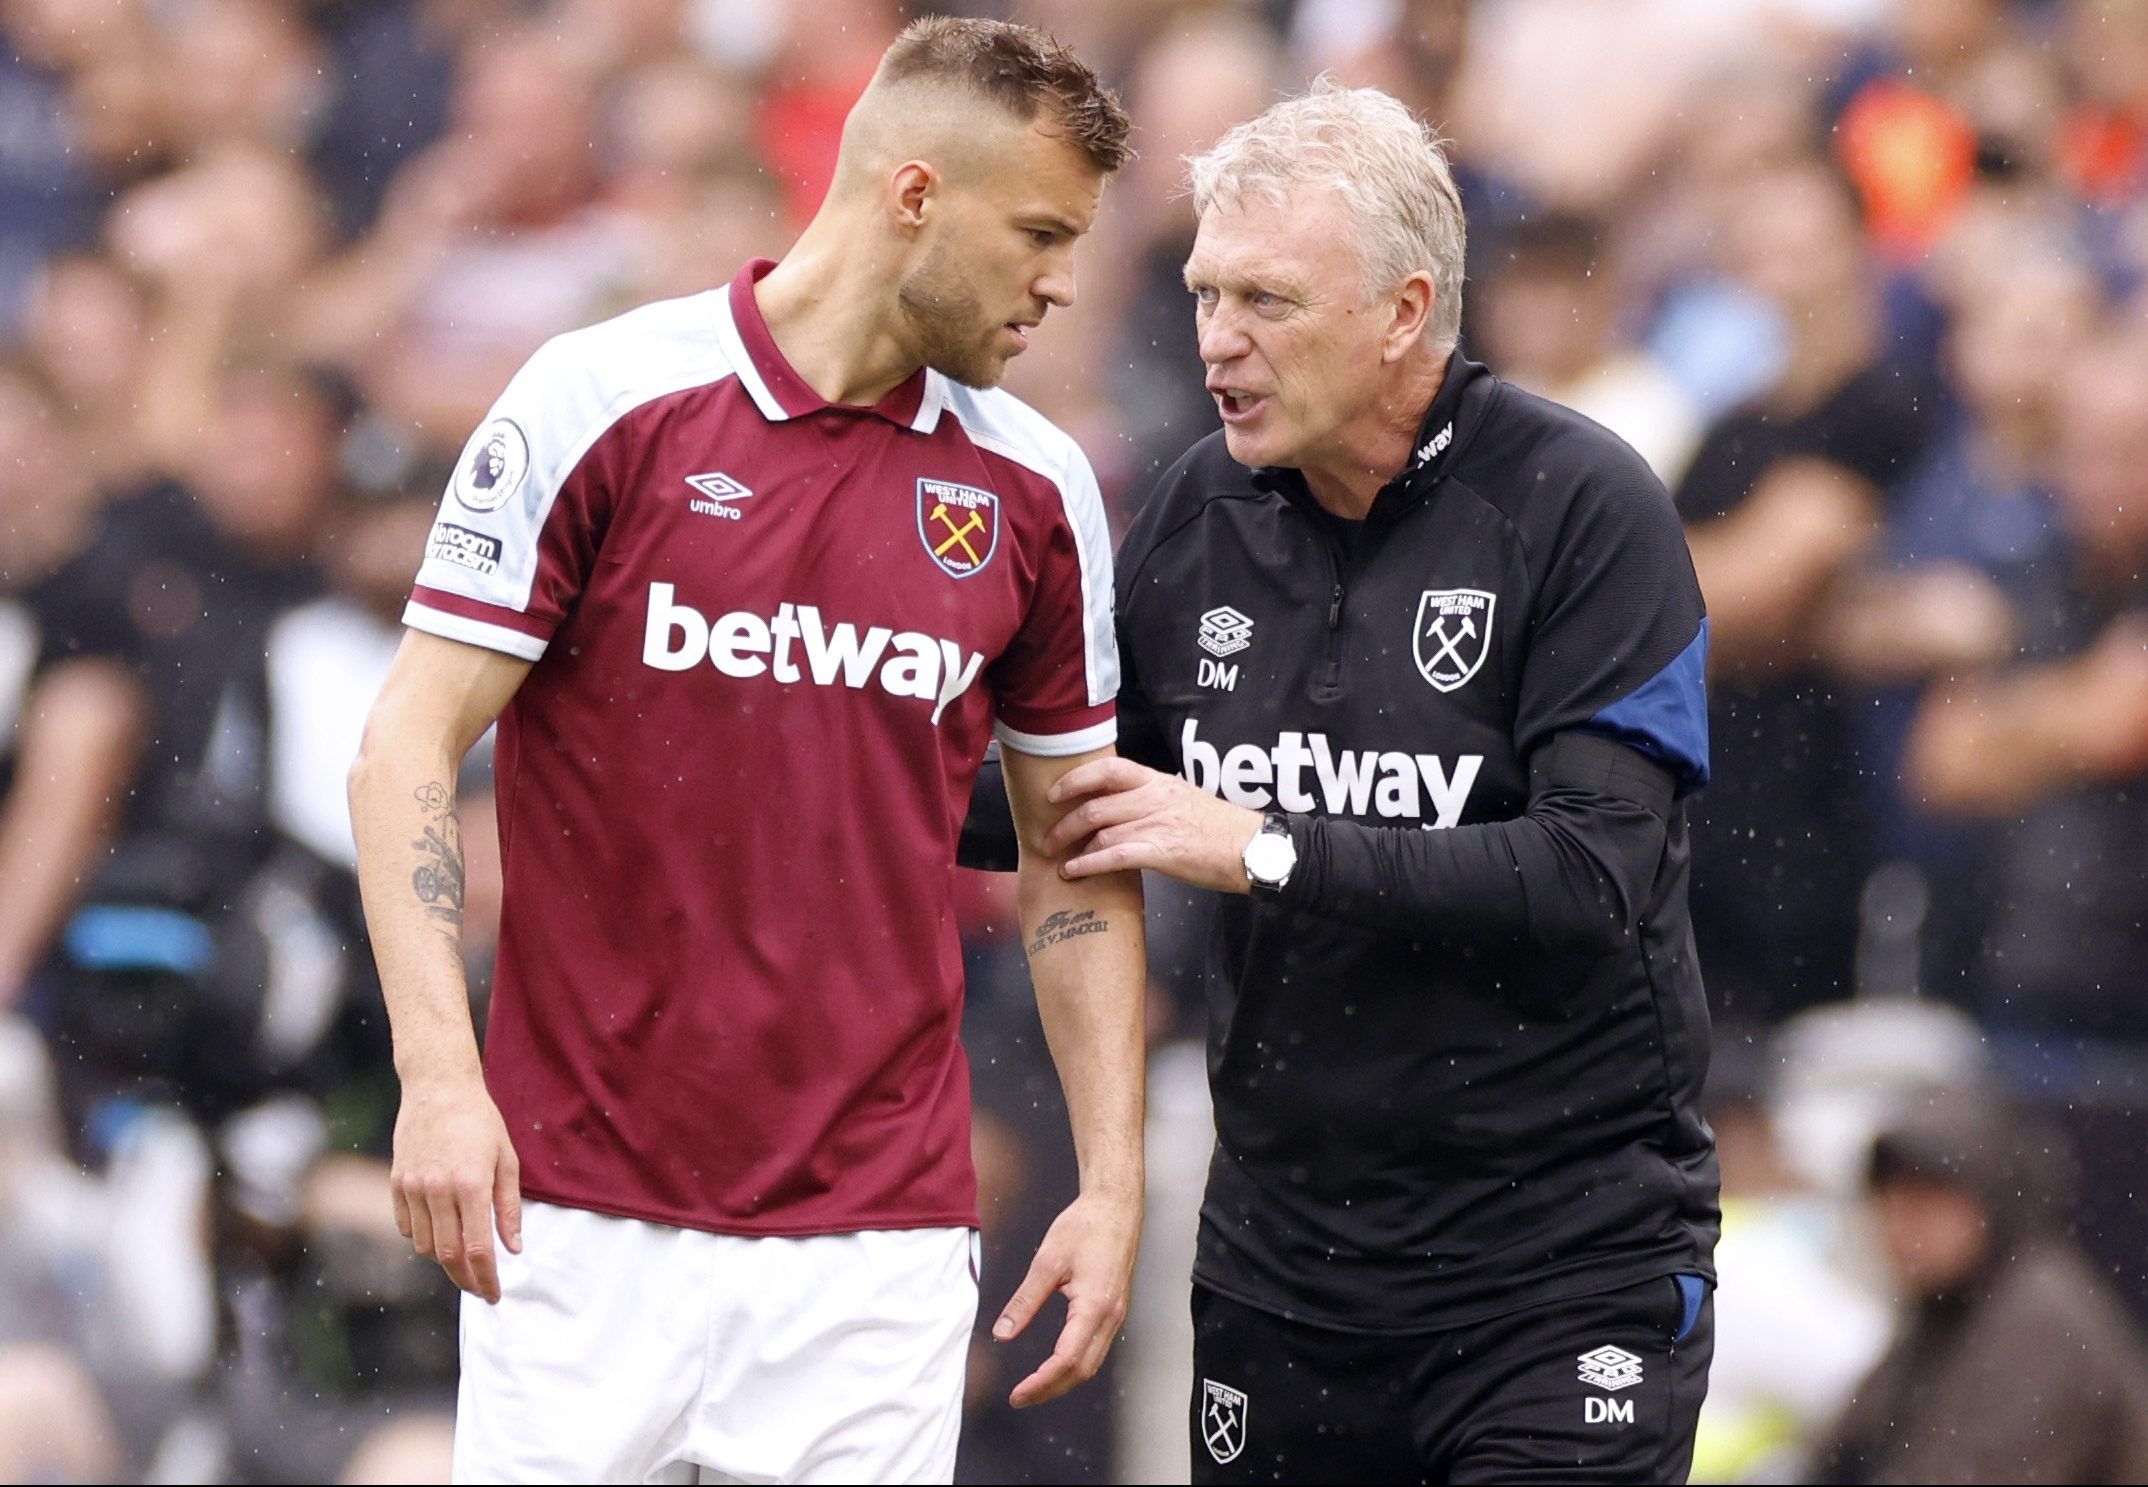 Soccer Football - Premier League - West Ham United v Manchester United - London Stadium, London, Britain - September 19, 2021 West Ham United's Andriy Yarmolenko talks with manager David Moyes as he gets ready to come on as a substitute Action Images via Reuters/John Sibley EDITORIAL USE ONLY. No use with unauthorized audio, video, data, fixture lists, club/league logos or 'live' services. Online in-match use limited to 75 images, no video emulation. No use in betting, games or single club /leag